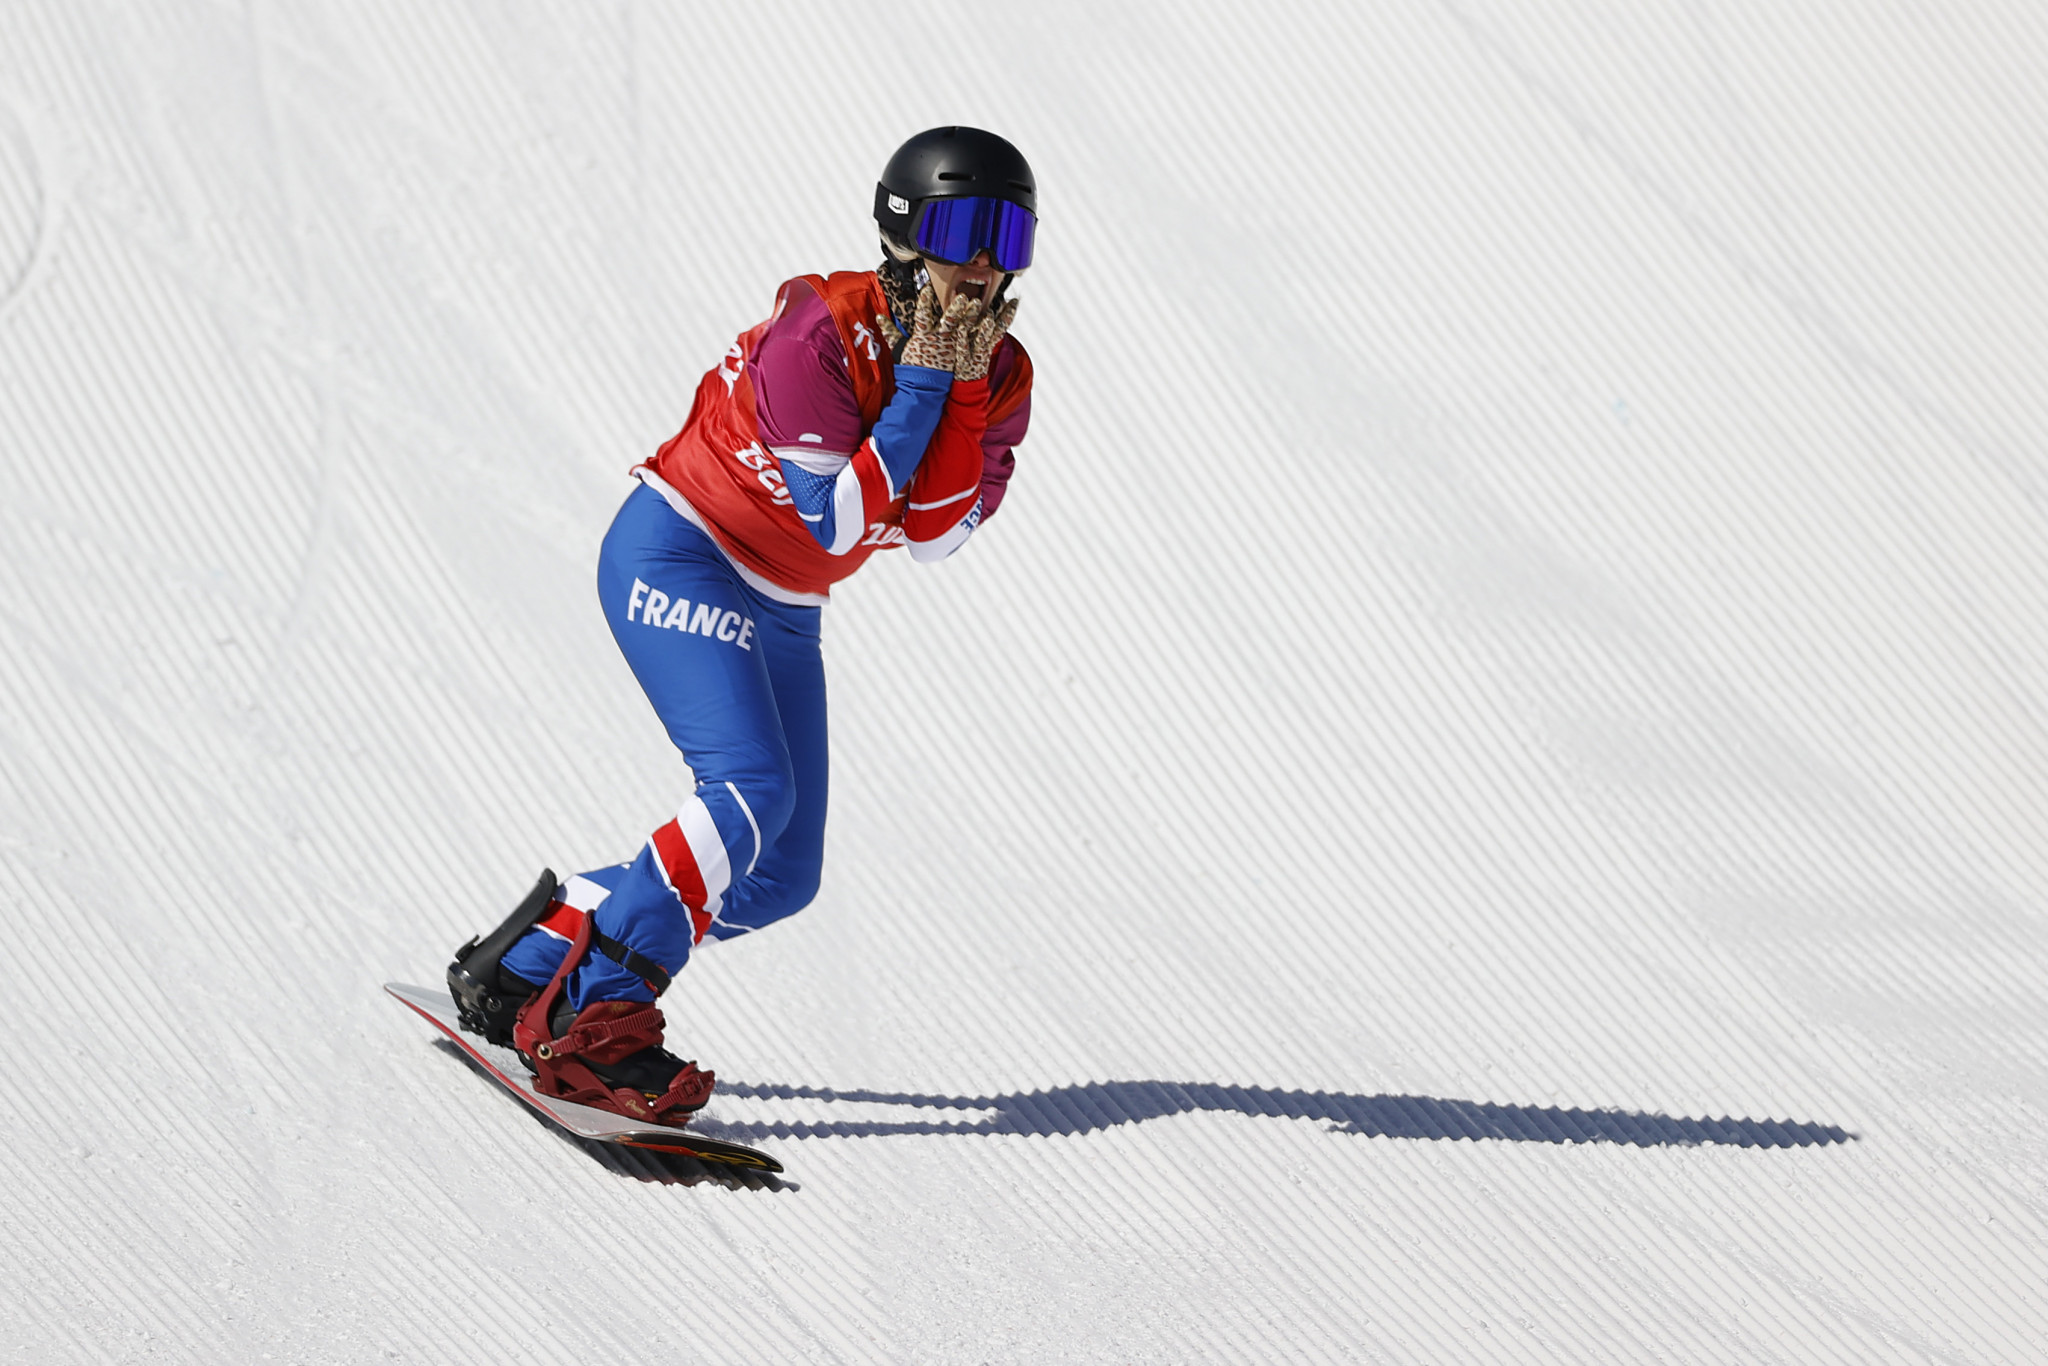 France's Cécile Hernandez won the women's SB-LL2 snowboard cross to achieve her first Paralympic gold medal ©Getty Images